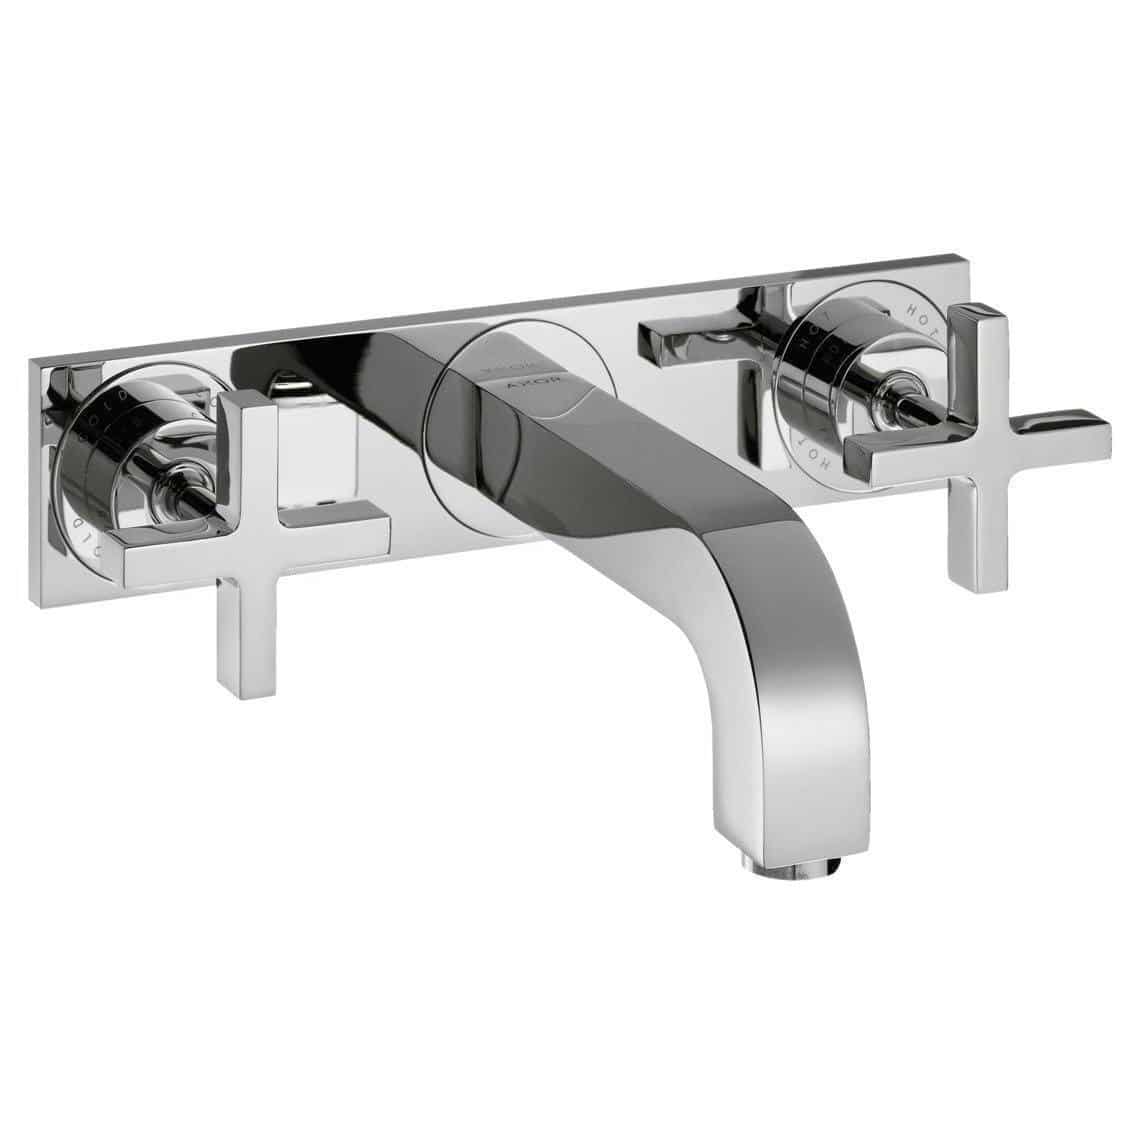 Haji Gallery,Axor,Axor Citterio 3-Hole Basin Mixer Cross Handles For Concealed With Spout 166 Mm Wall- Mounted,Bathroom Mixers.